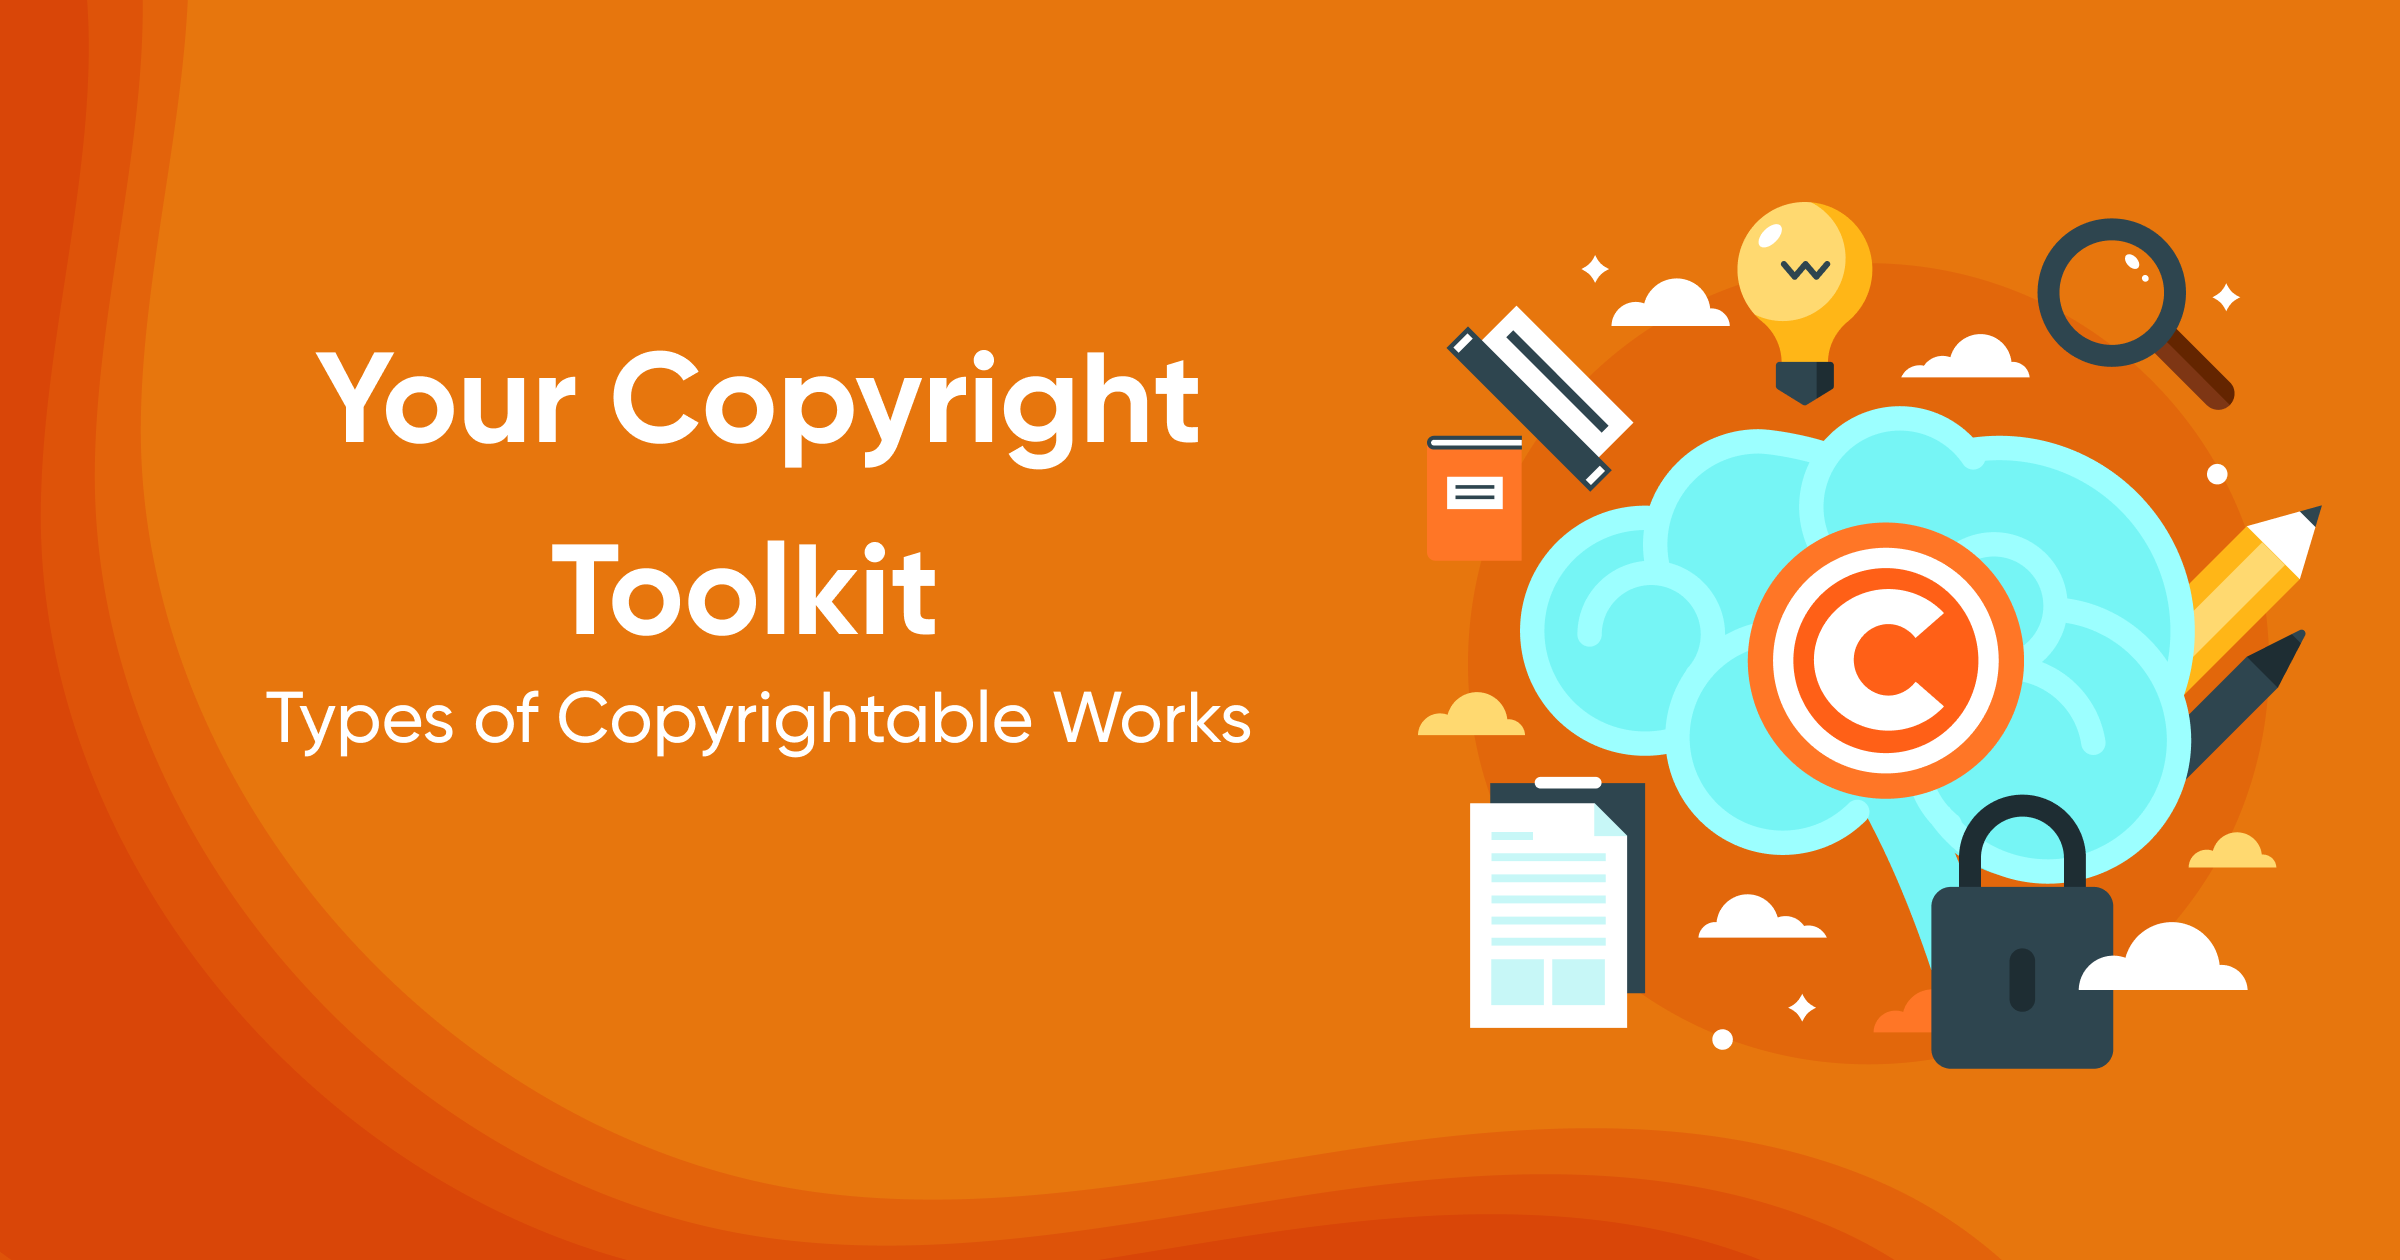 Types of Copyrightable Works